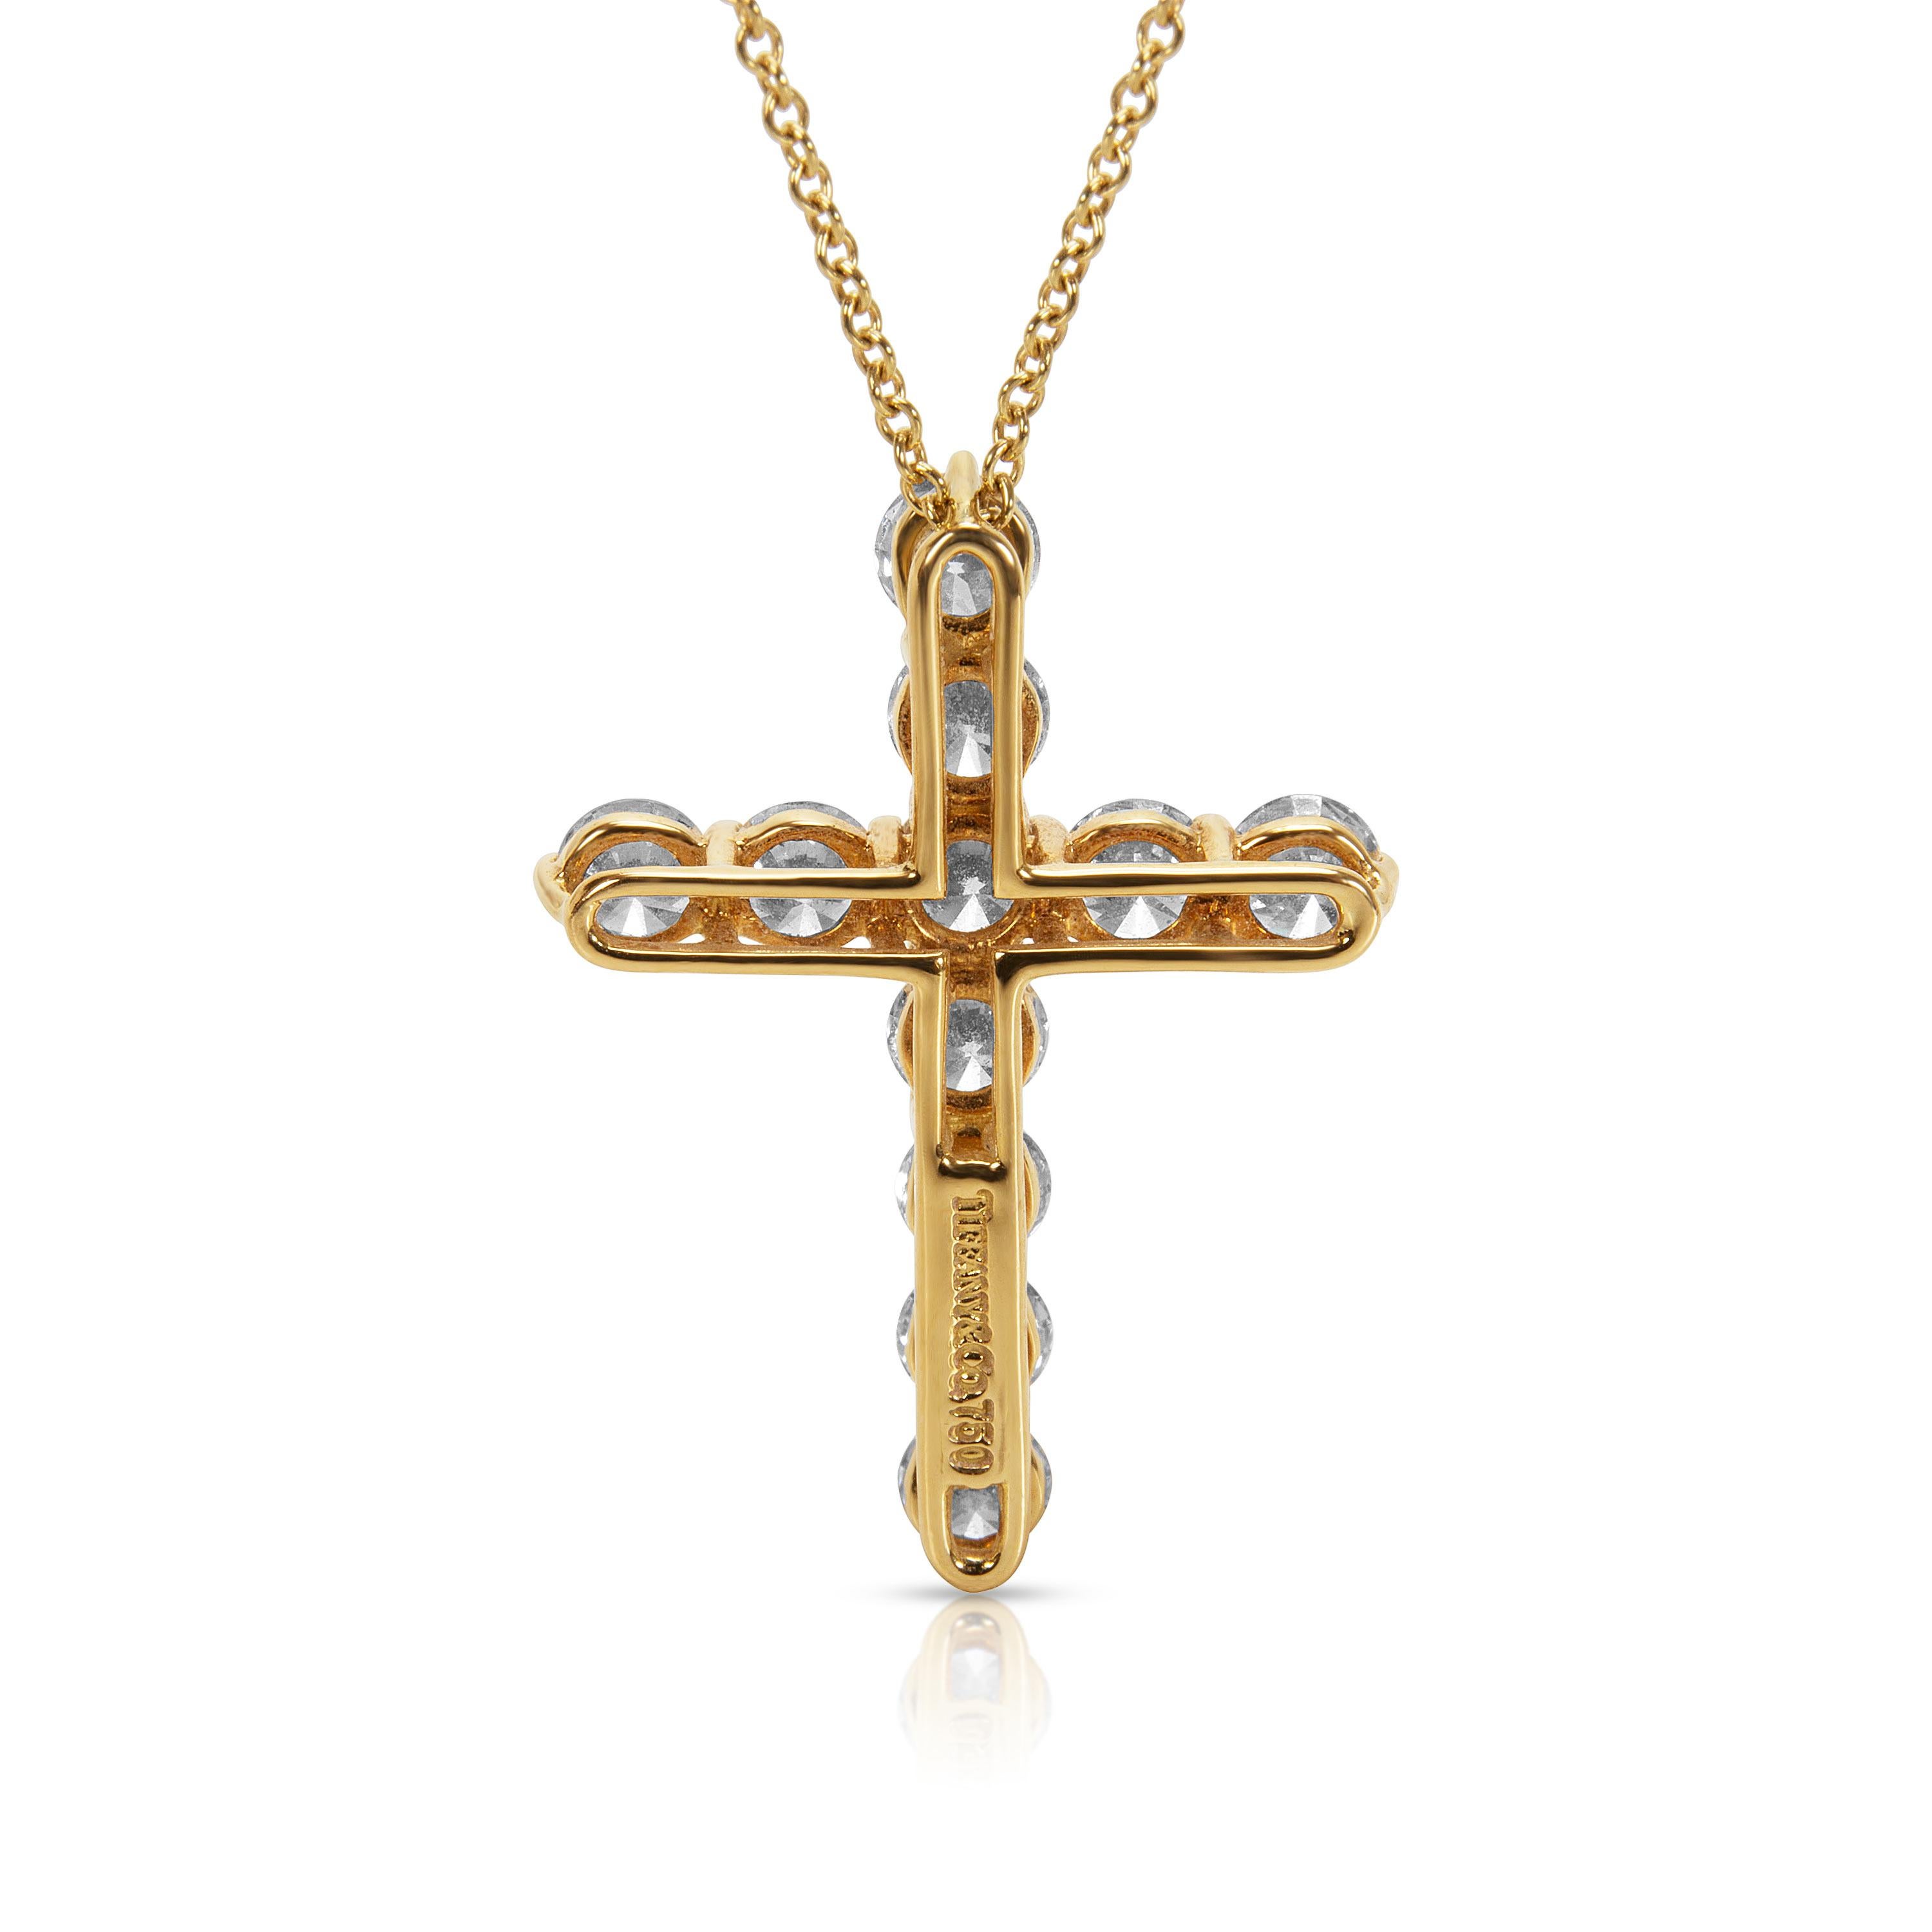 Retails for 9,700 USD. Pre-owned in excellent condition and recently polished. Photos of actual item. Chain is 16 inches in length. Cross is 27mm in length.

Stone Type: Diamond
# of Diamonds: 11
Total weight: 2.00 ctw
Shape: Round
Color: